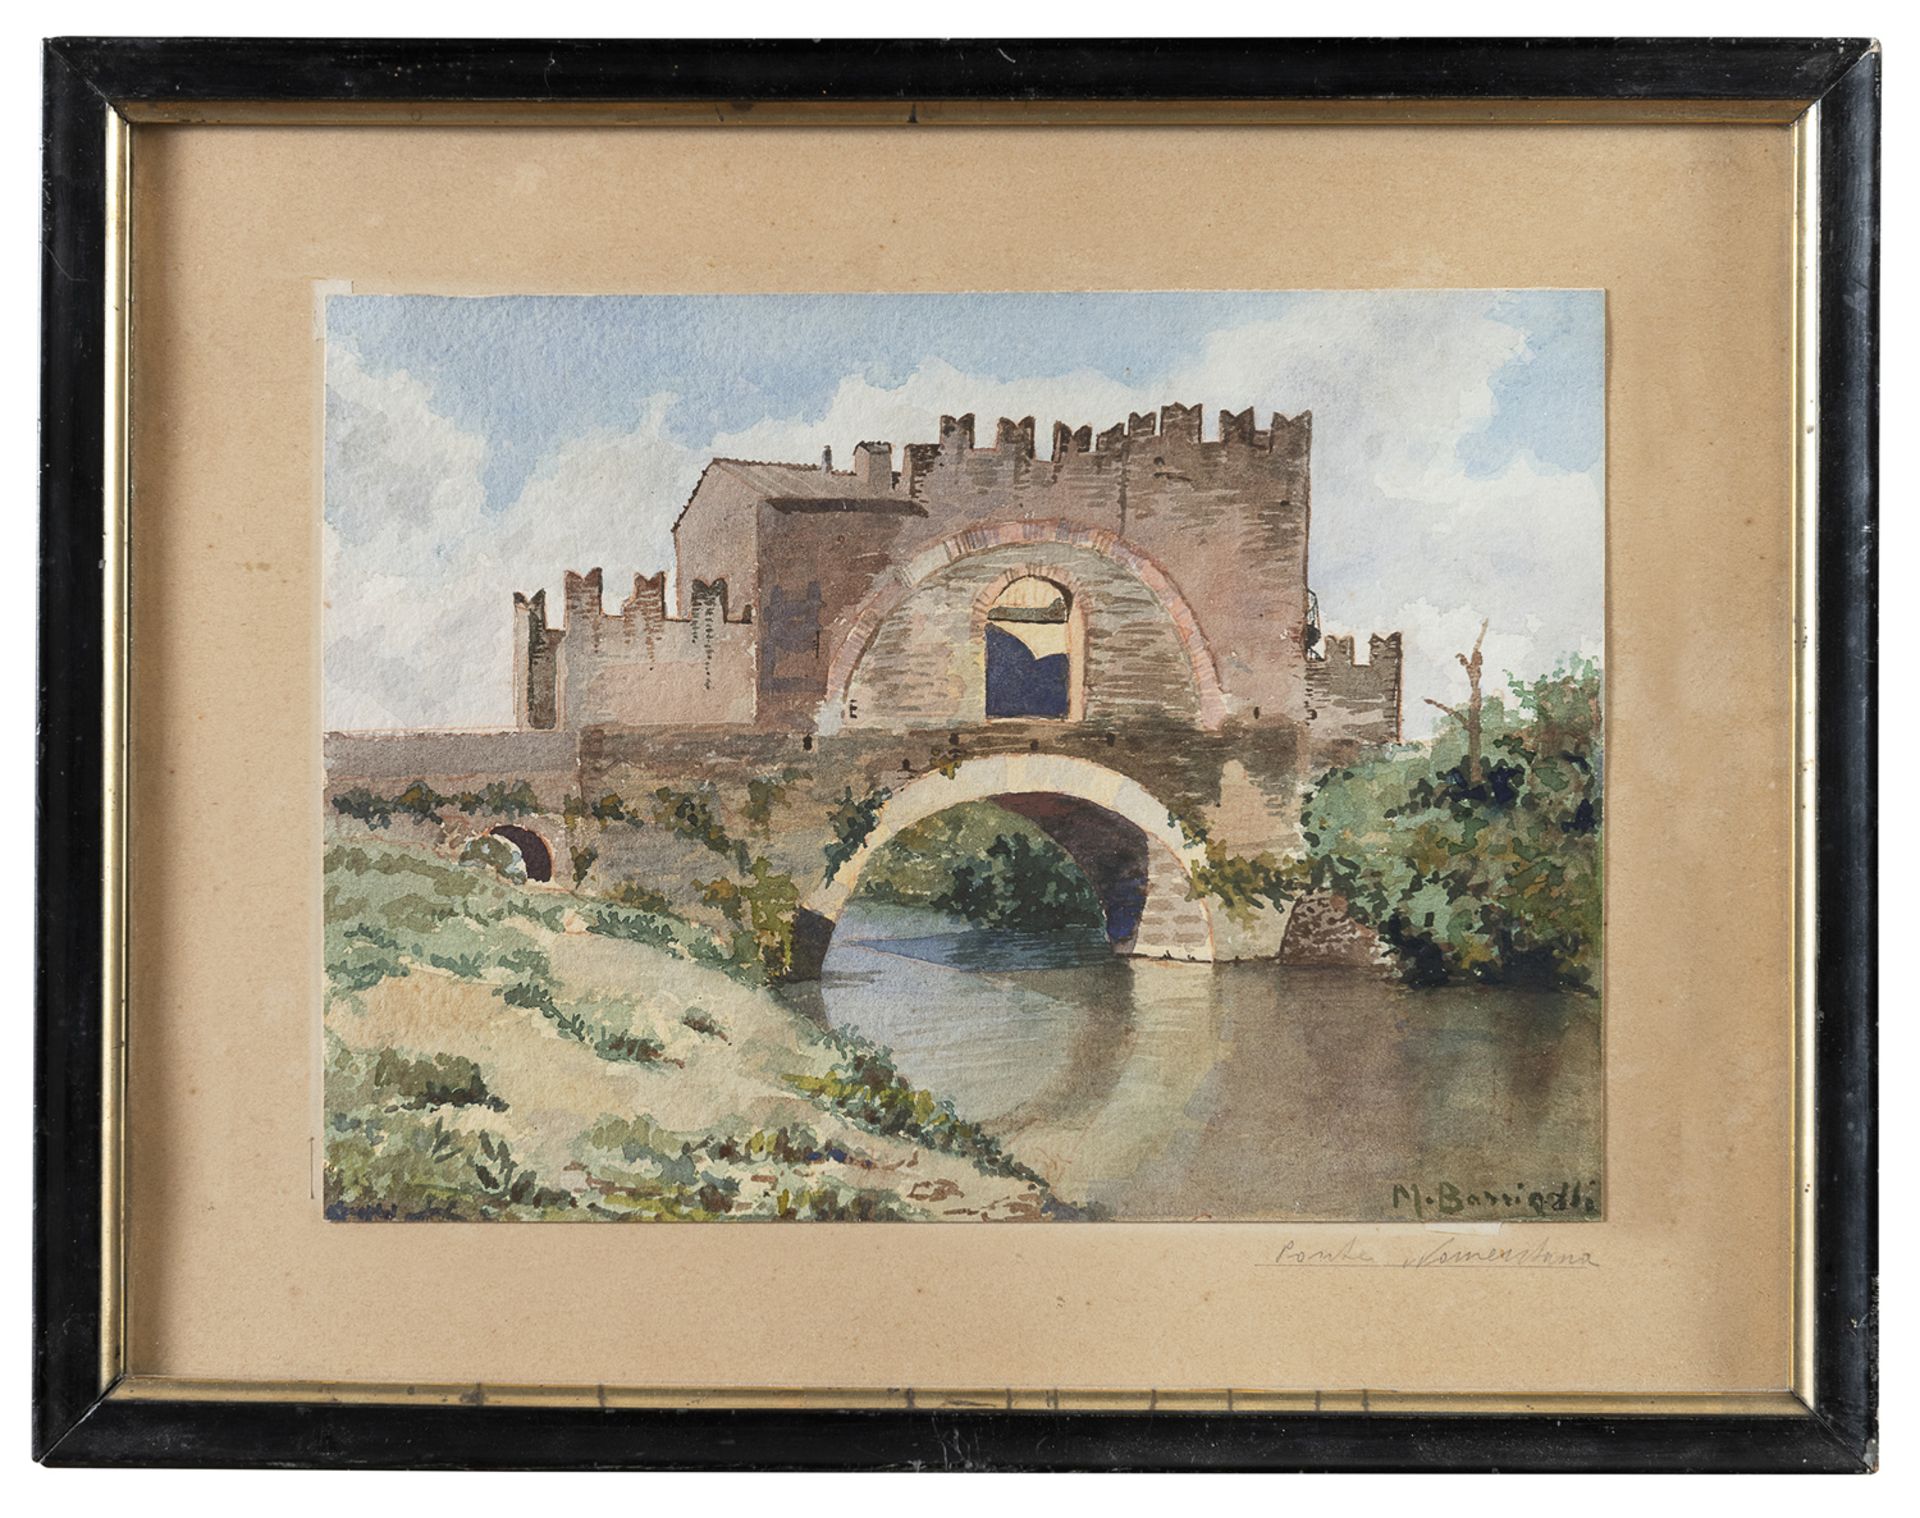 PAIR OF WATERCOLOURS BY M. BARRICELLI 20TH CENTURY - Image 2 of 2